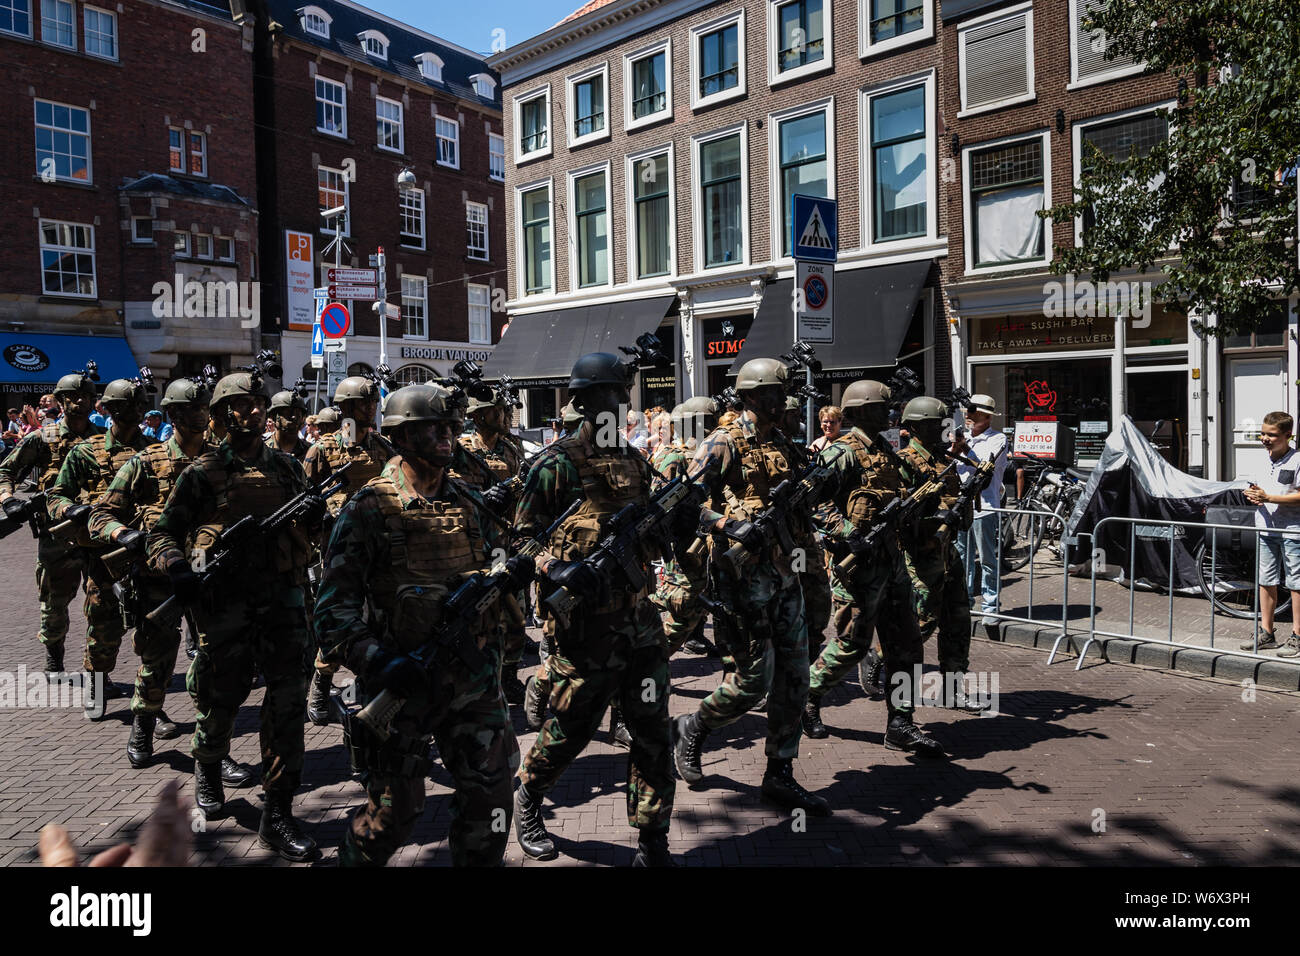 Military troops marching at the parade on the 2018 Veterans' Day in The Hague Stock Photo